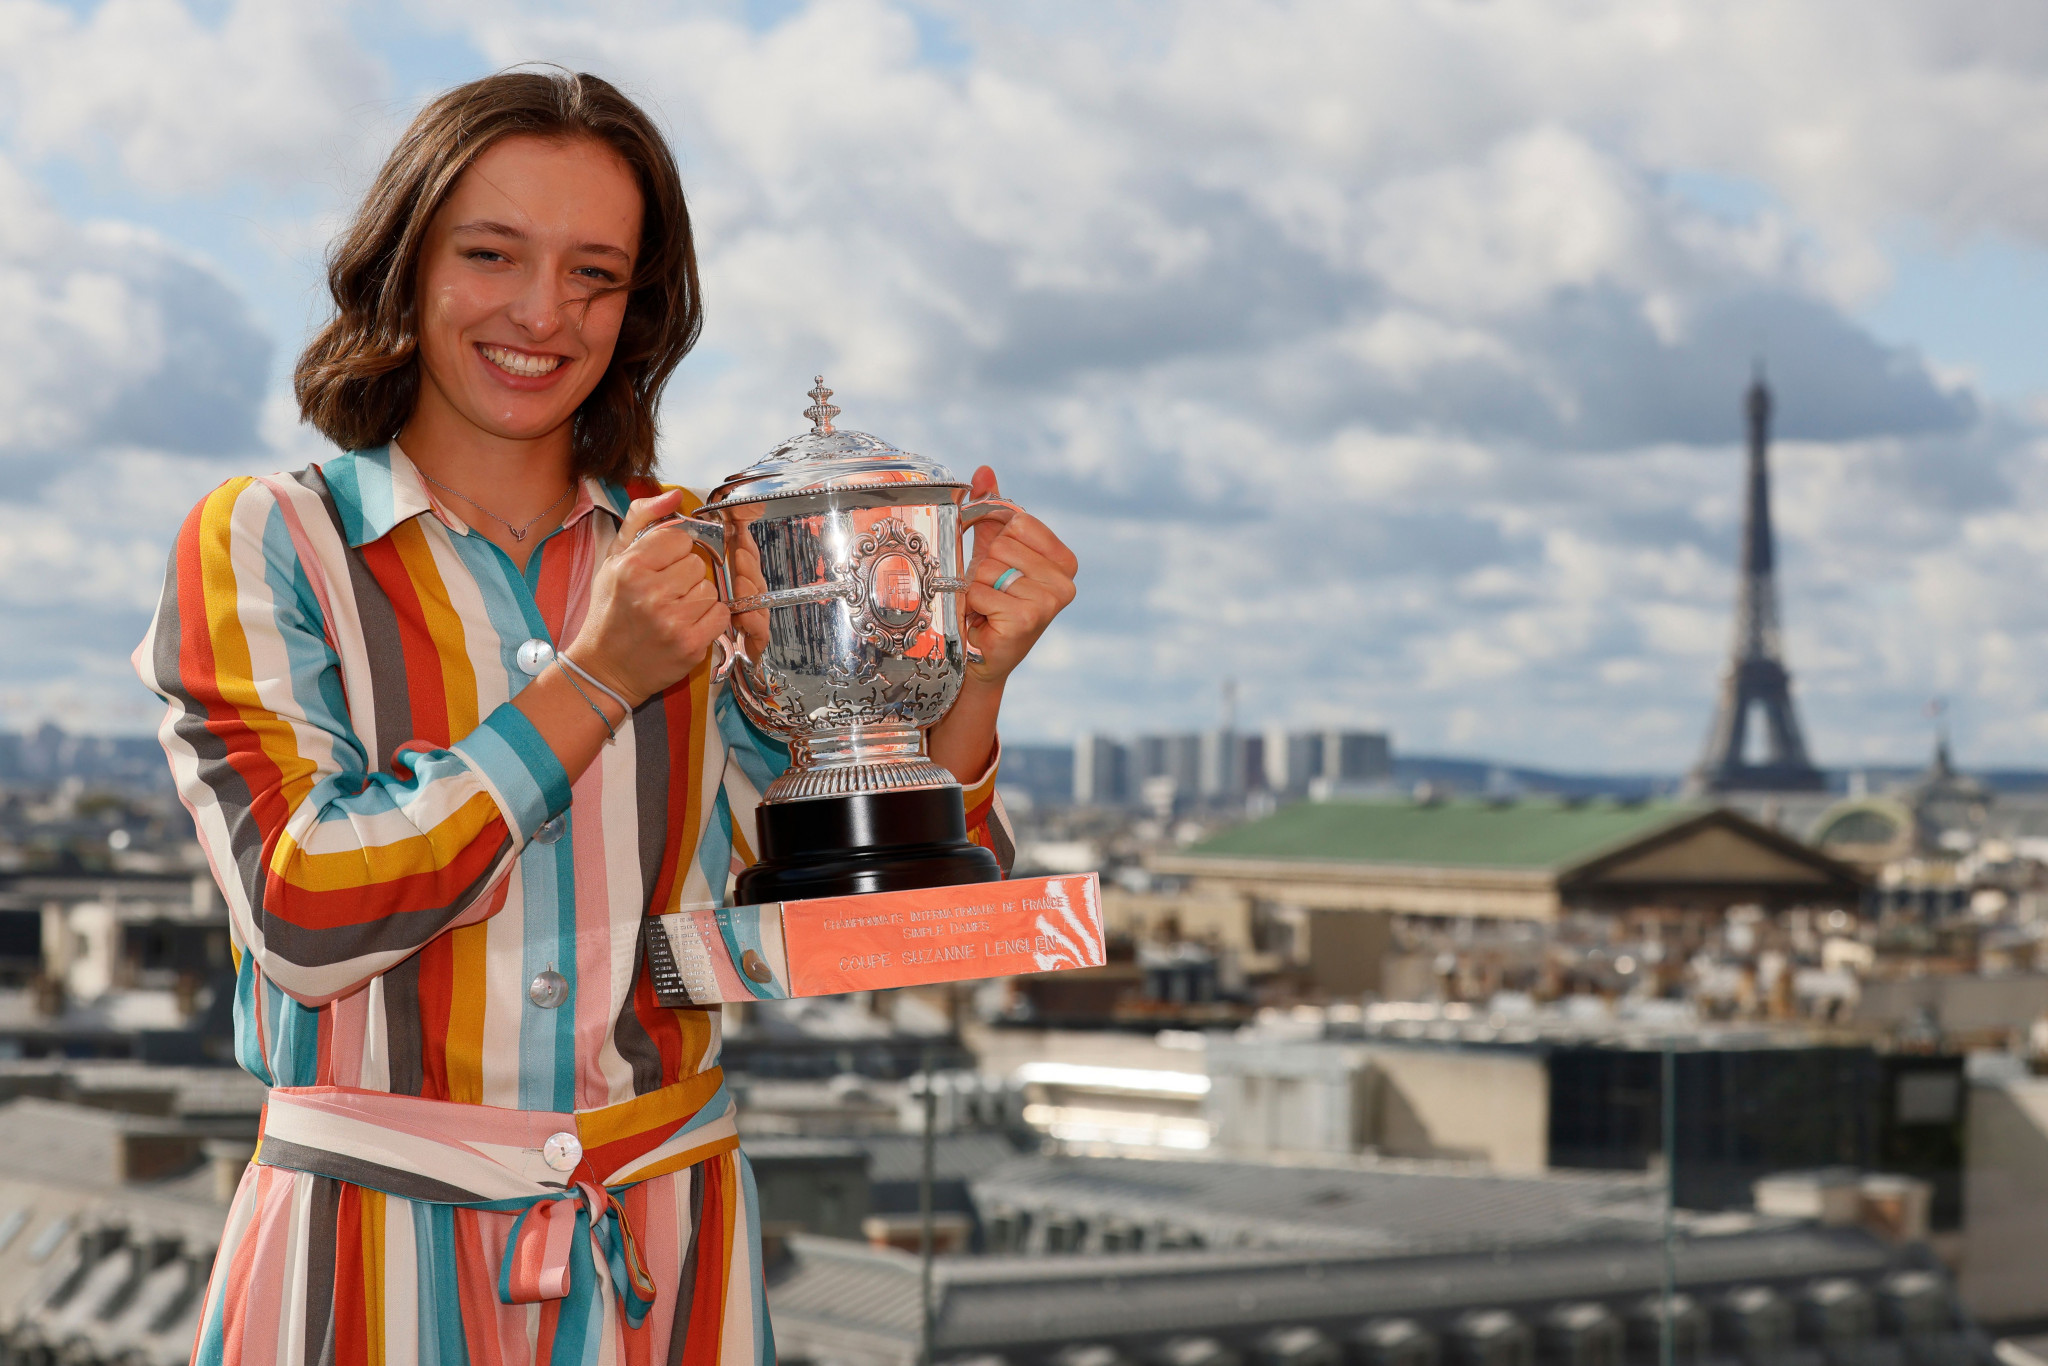 Iga Świątek was named as the WTA Most Improved Player of the Year after capturing the French Open crown ©Getty Images